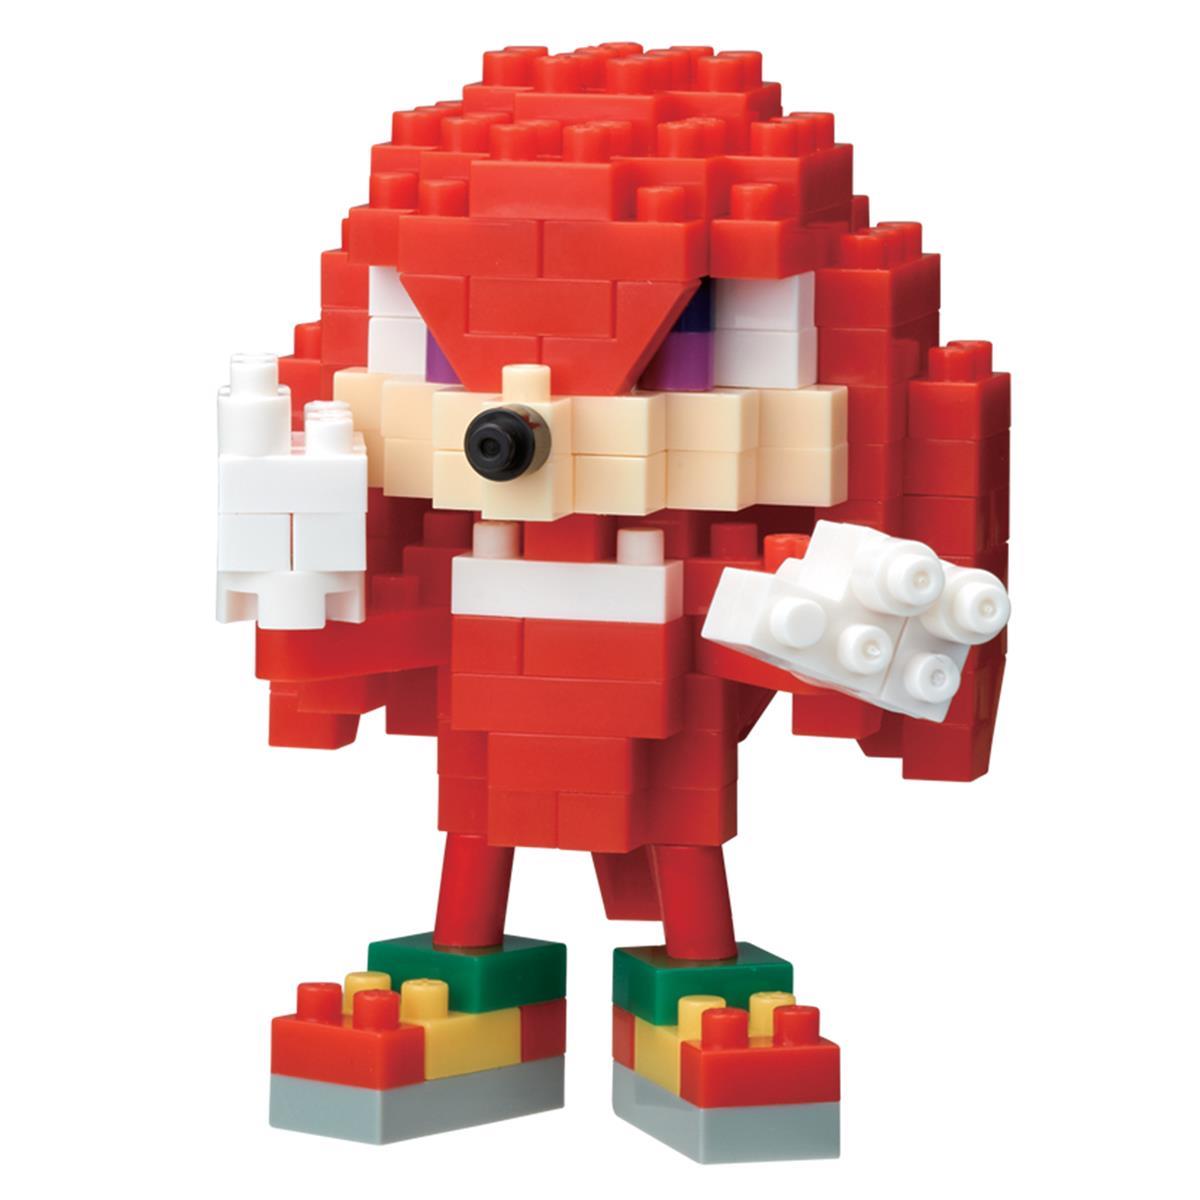 NBCC-084 - Knuckles